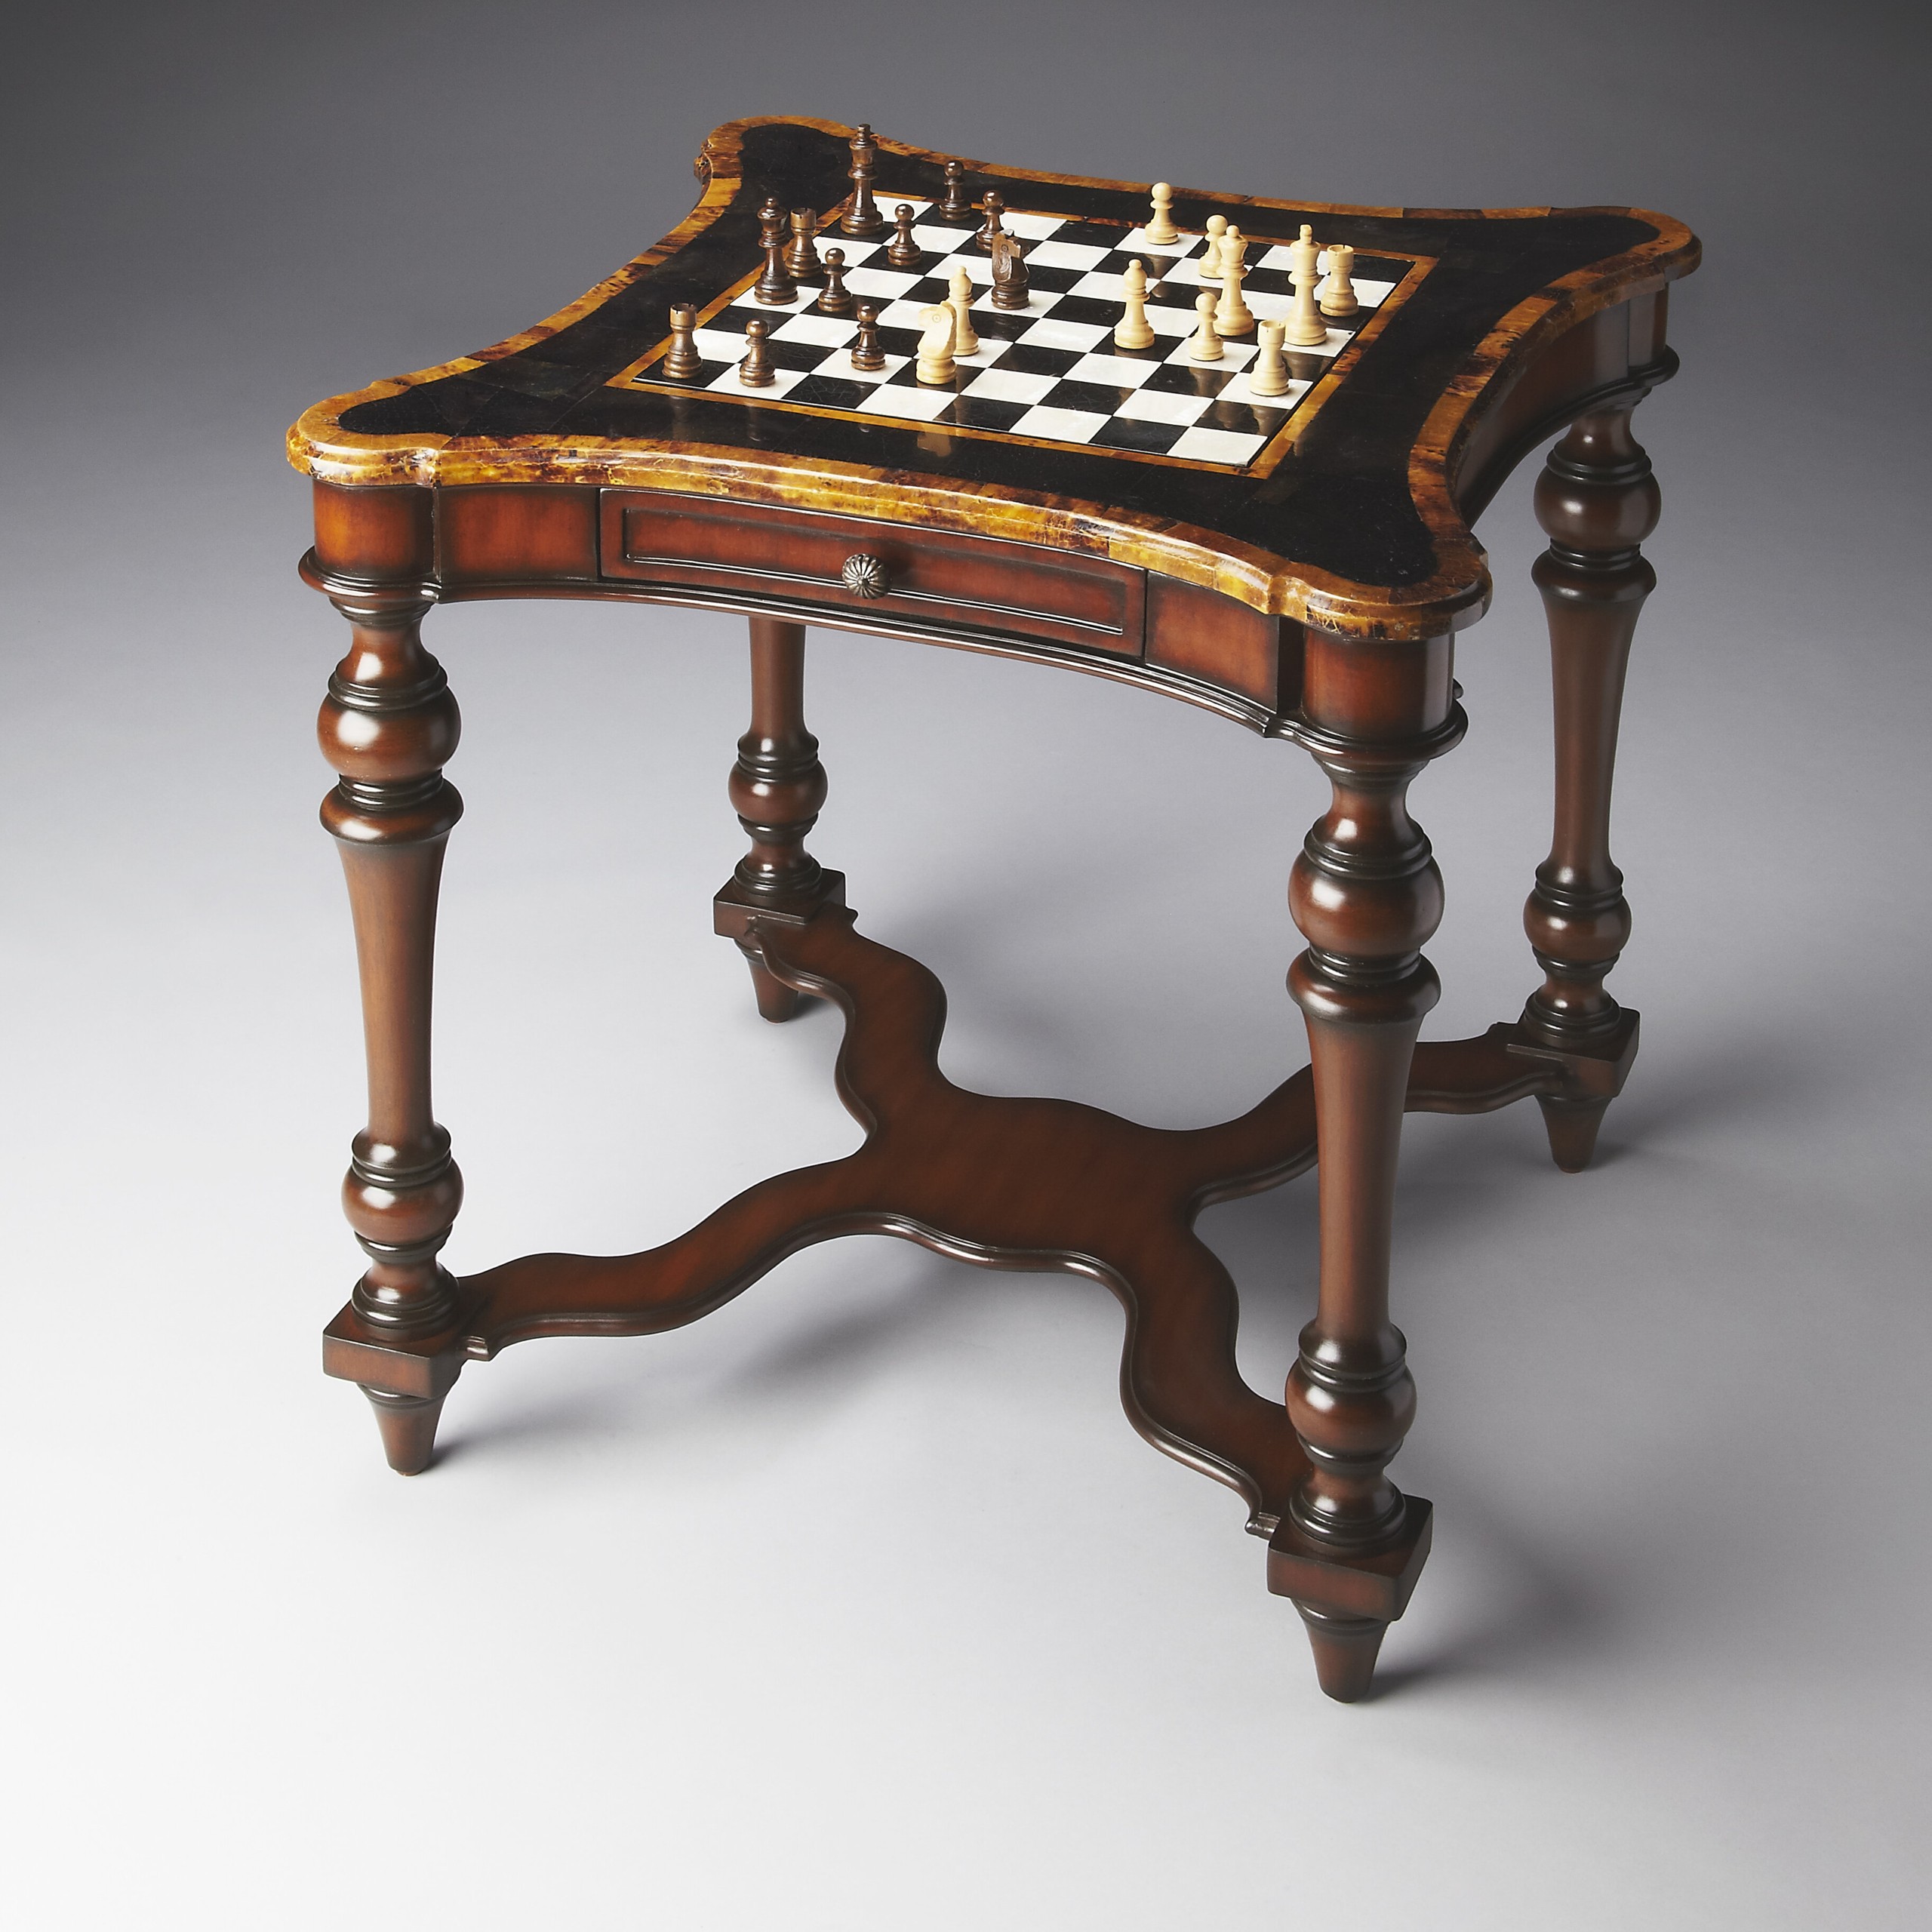 Chess board tables furniture